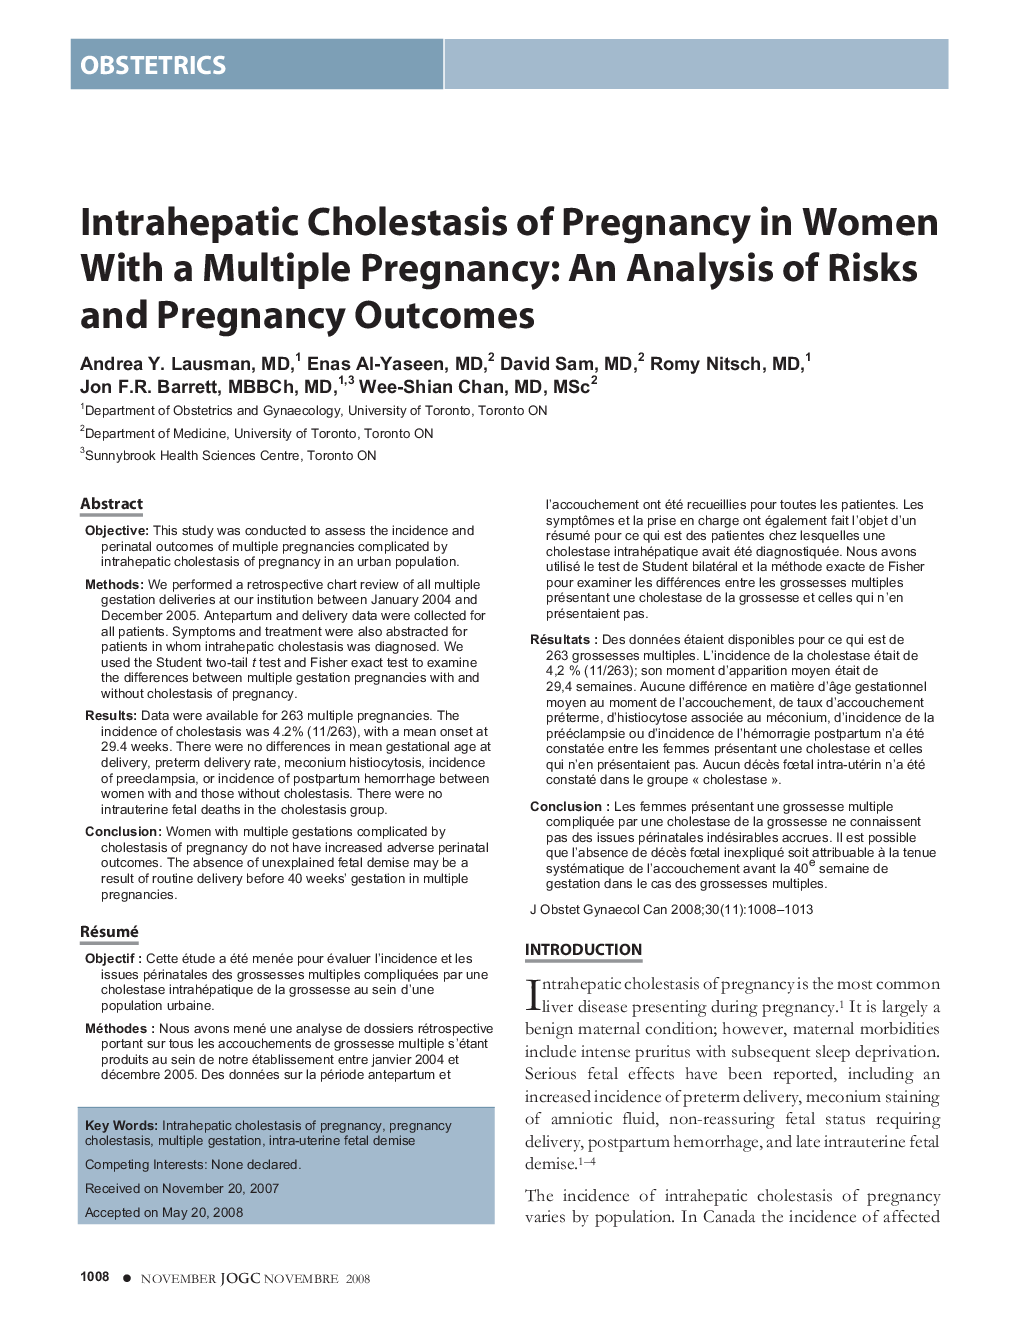 Intrahepatic Cholestasis of Pregnancy in Women With a Multiple Pregnancy: An Analysis of Risks and Pregnancy Outcomes